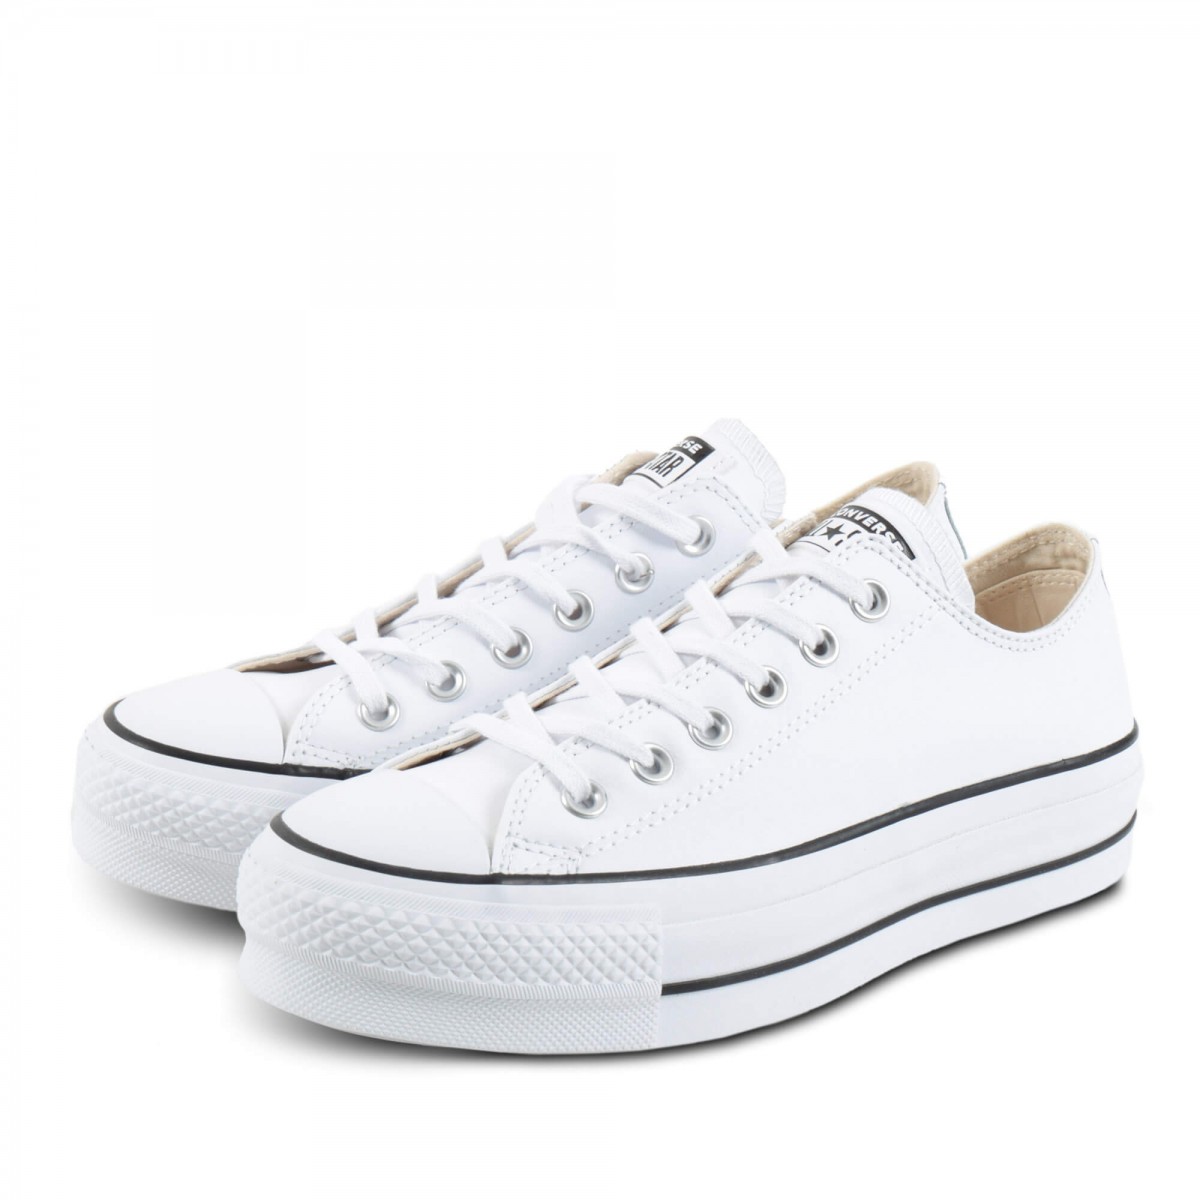 CONVERSE CHUCK TAYLOR ALL STAR PLATFORM LEATHER LOW TOP 561680C Λευκό